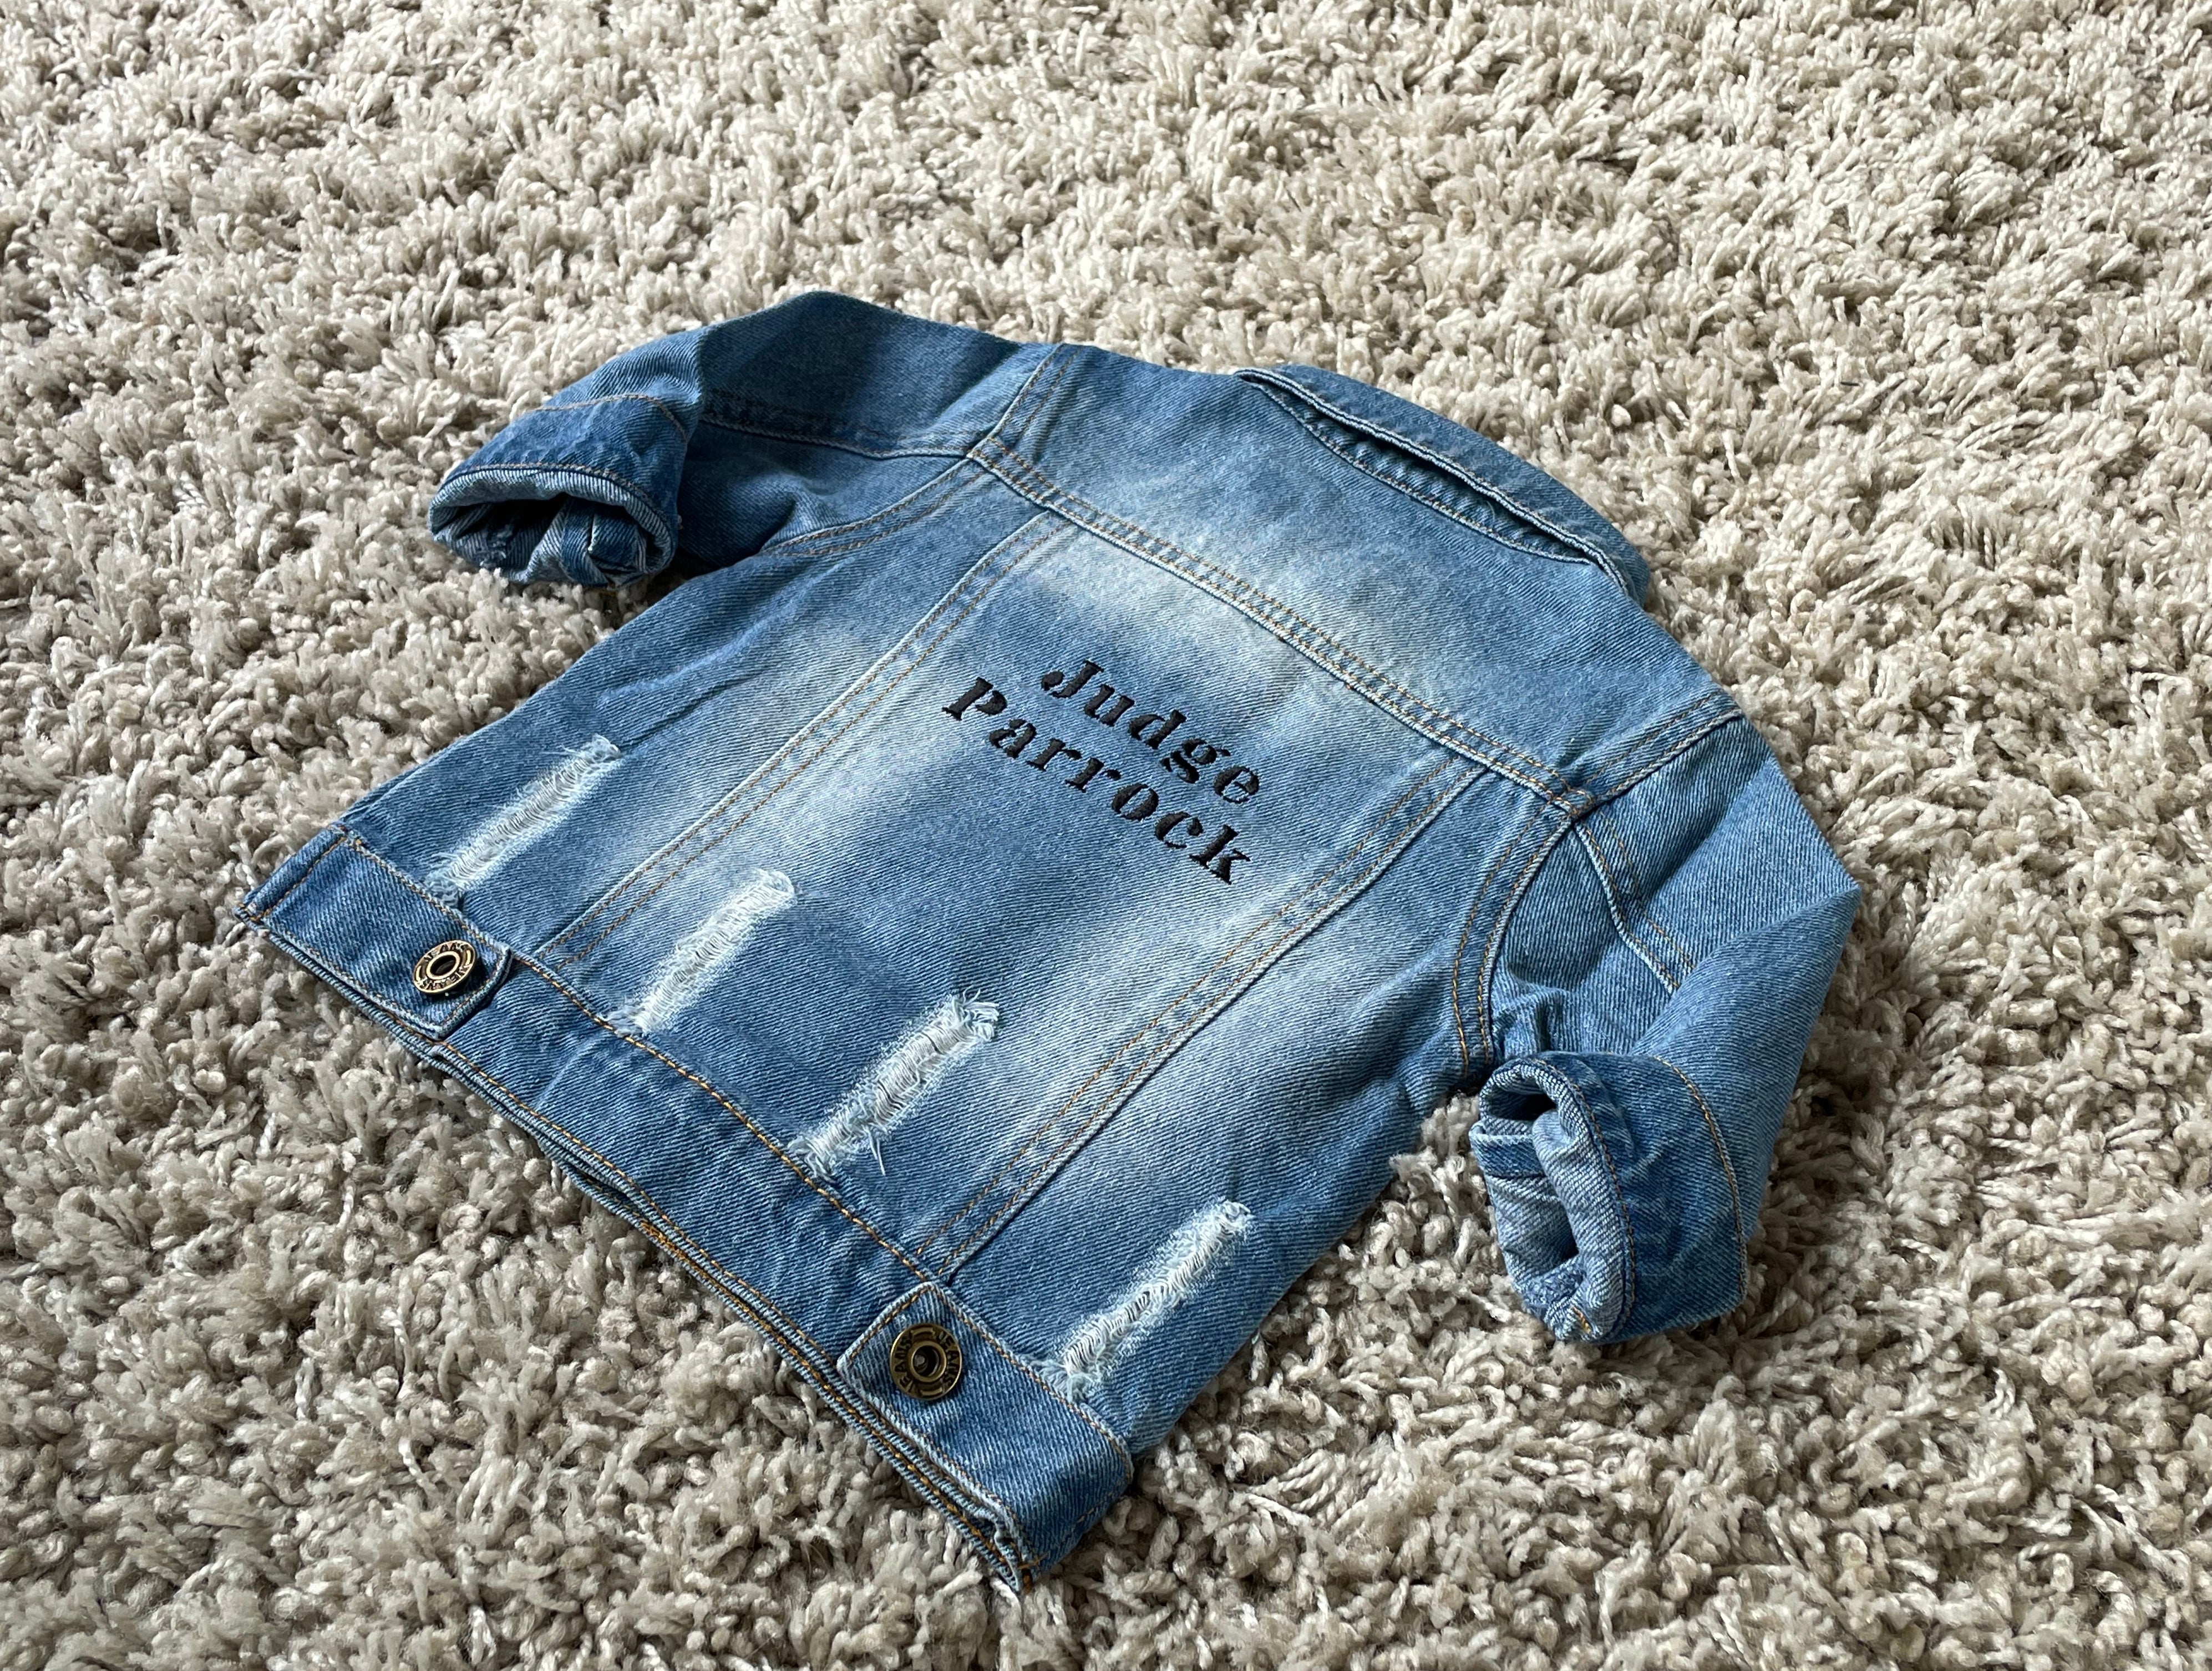 Personalised Baby/Toddler Denim Jacket With Embroidered Name